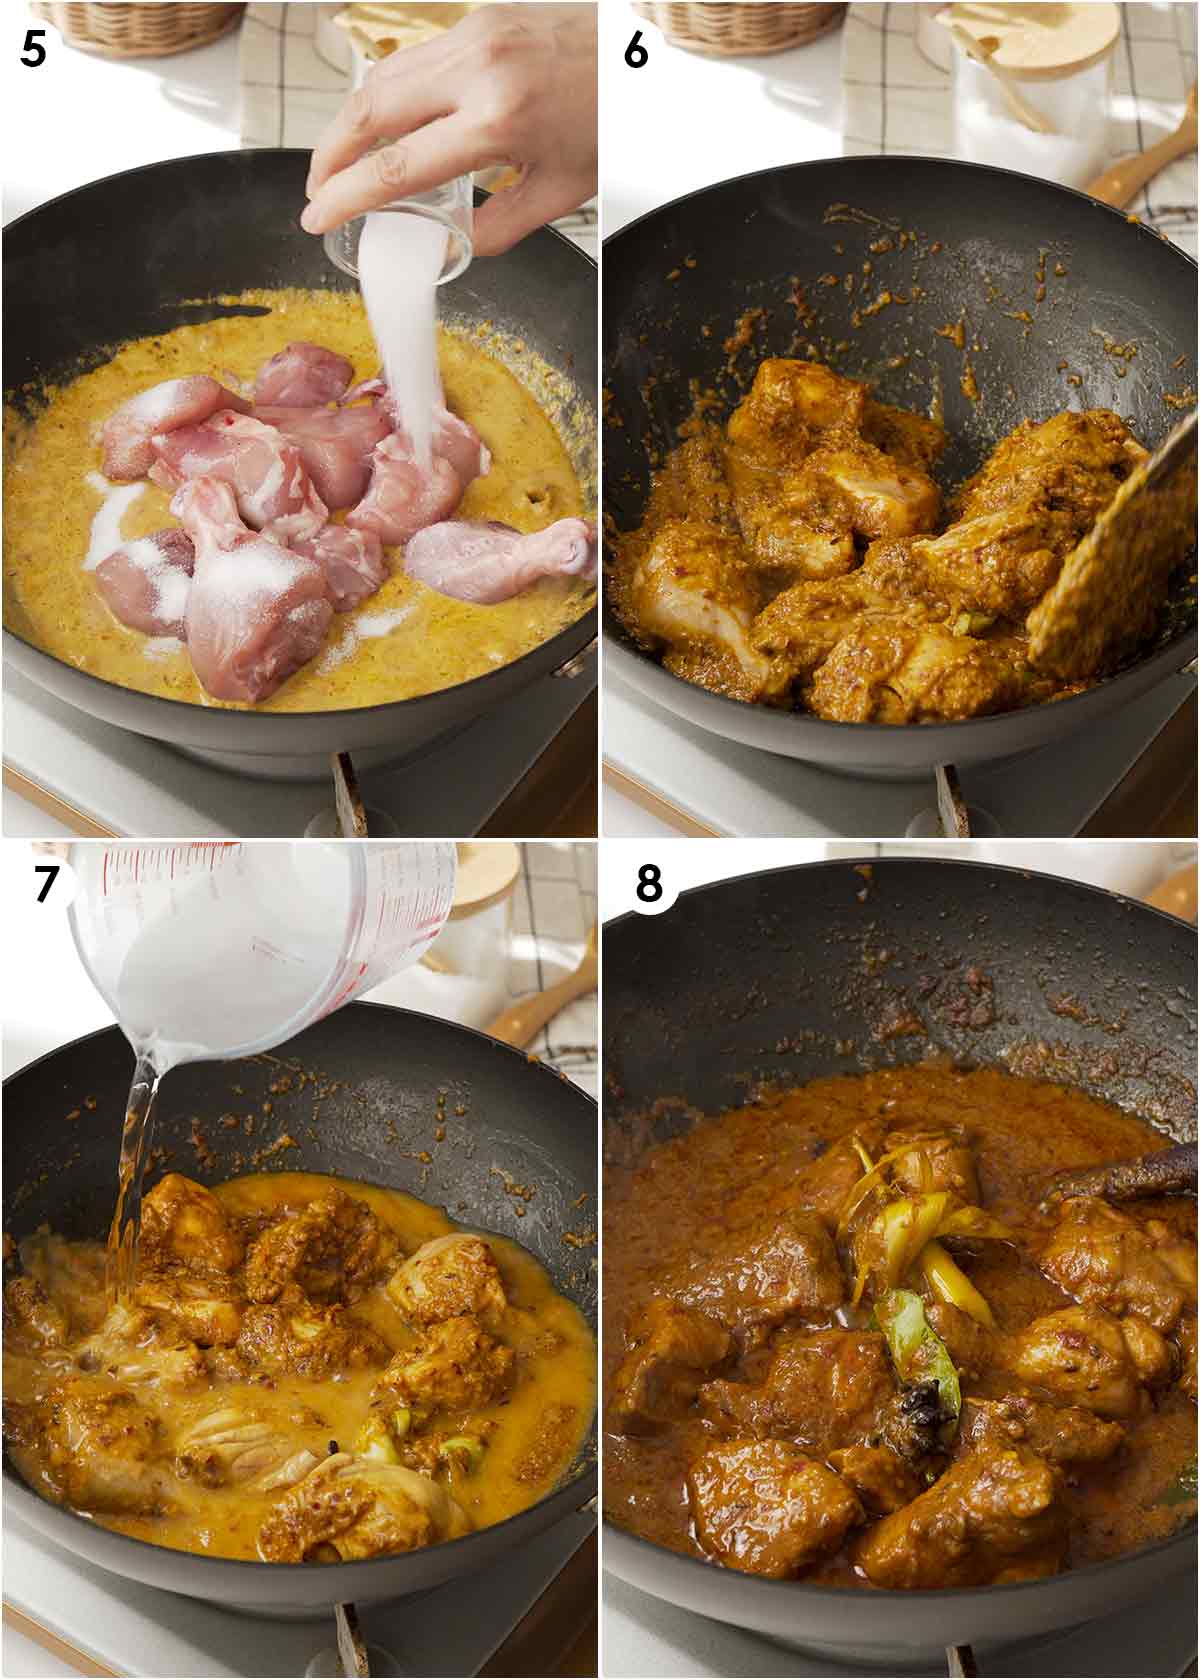 Four image collage showing how to prepare the chicken curry